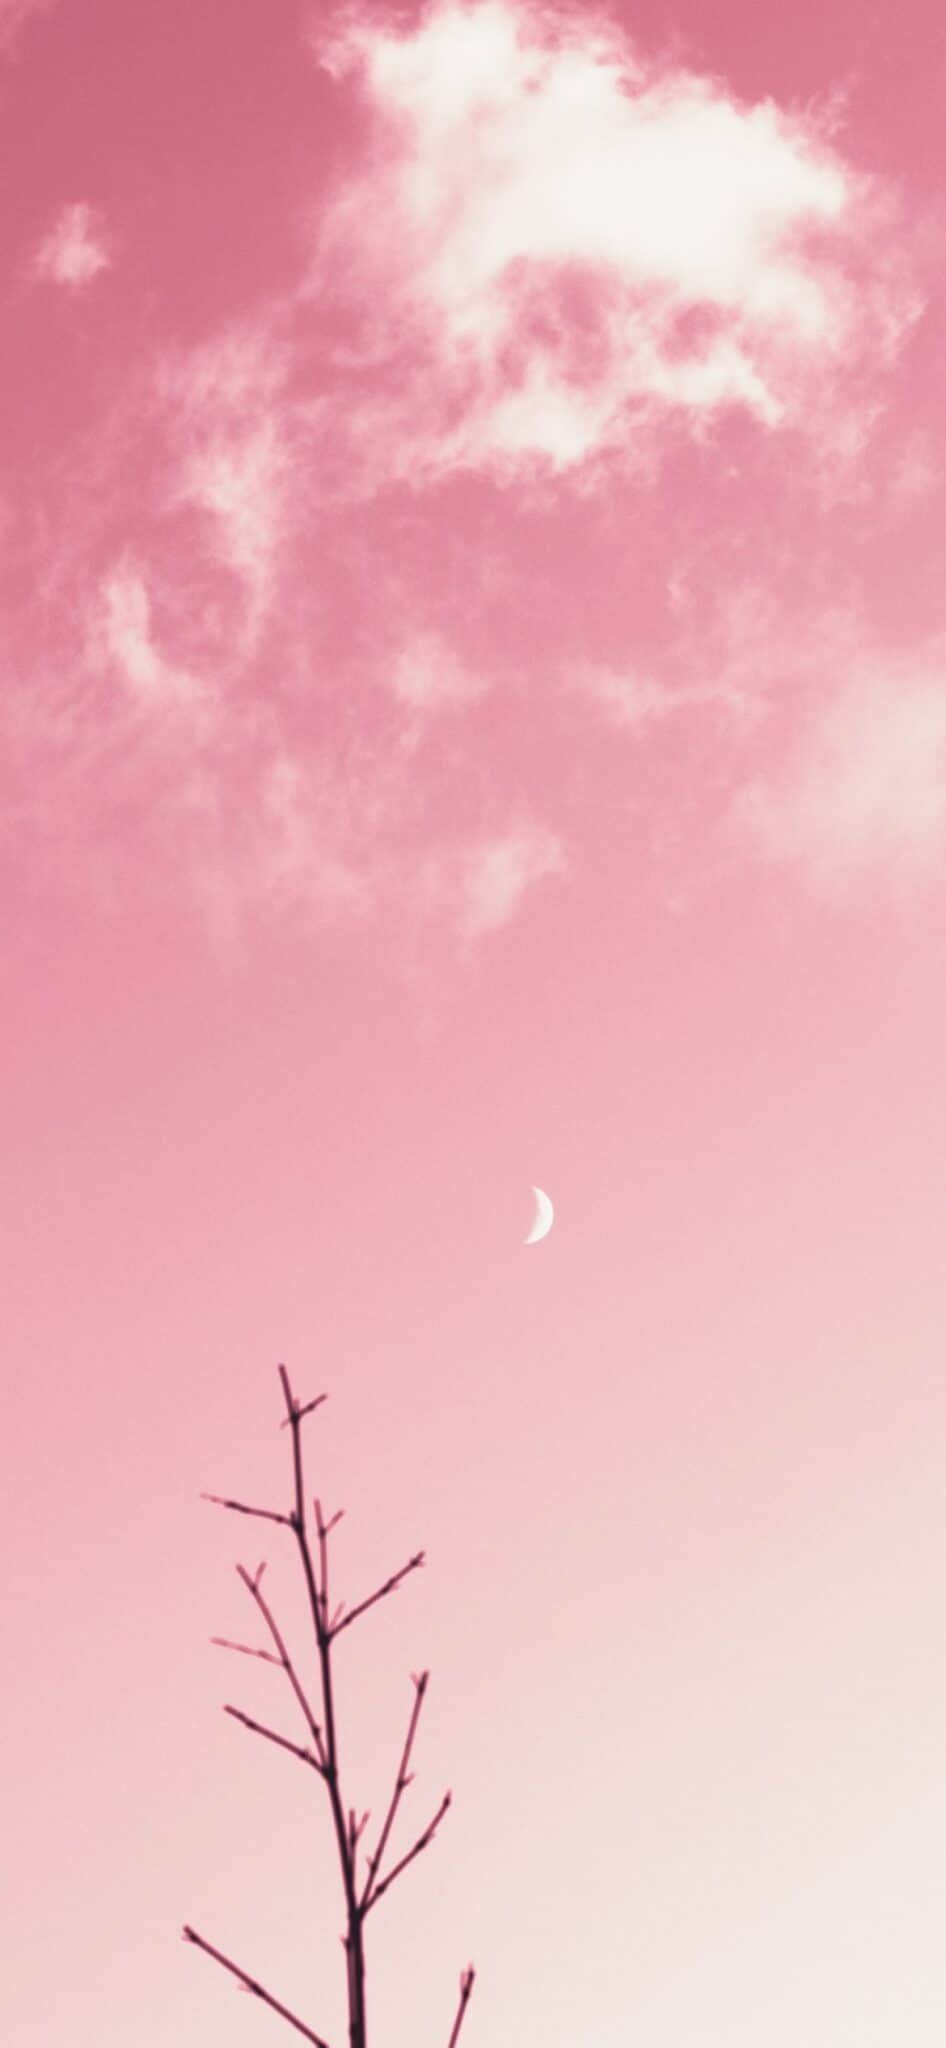 Pink Aesthetic Wallpaper Background You Need For Your Phone Right Now!. Pink clouds wallpaper, Phone wallpaper pink, Pastel pink wallpaper